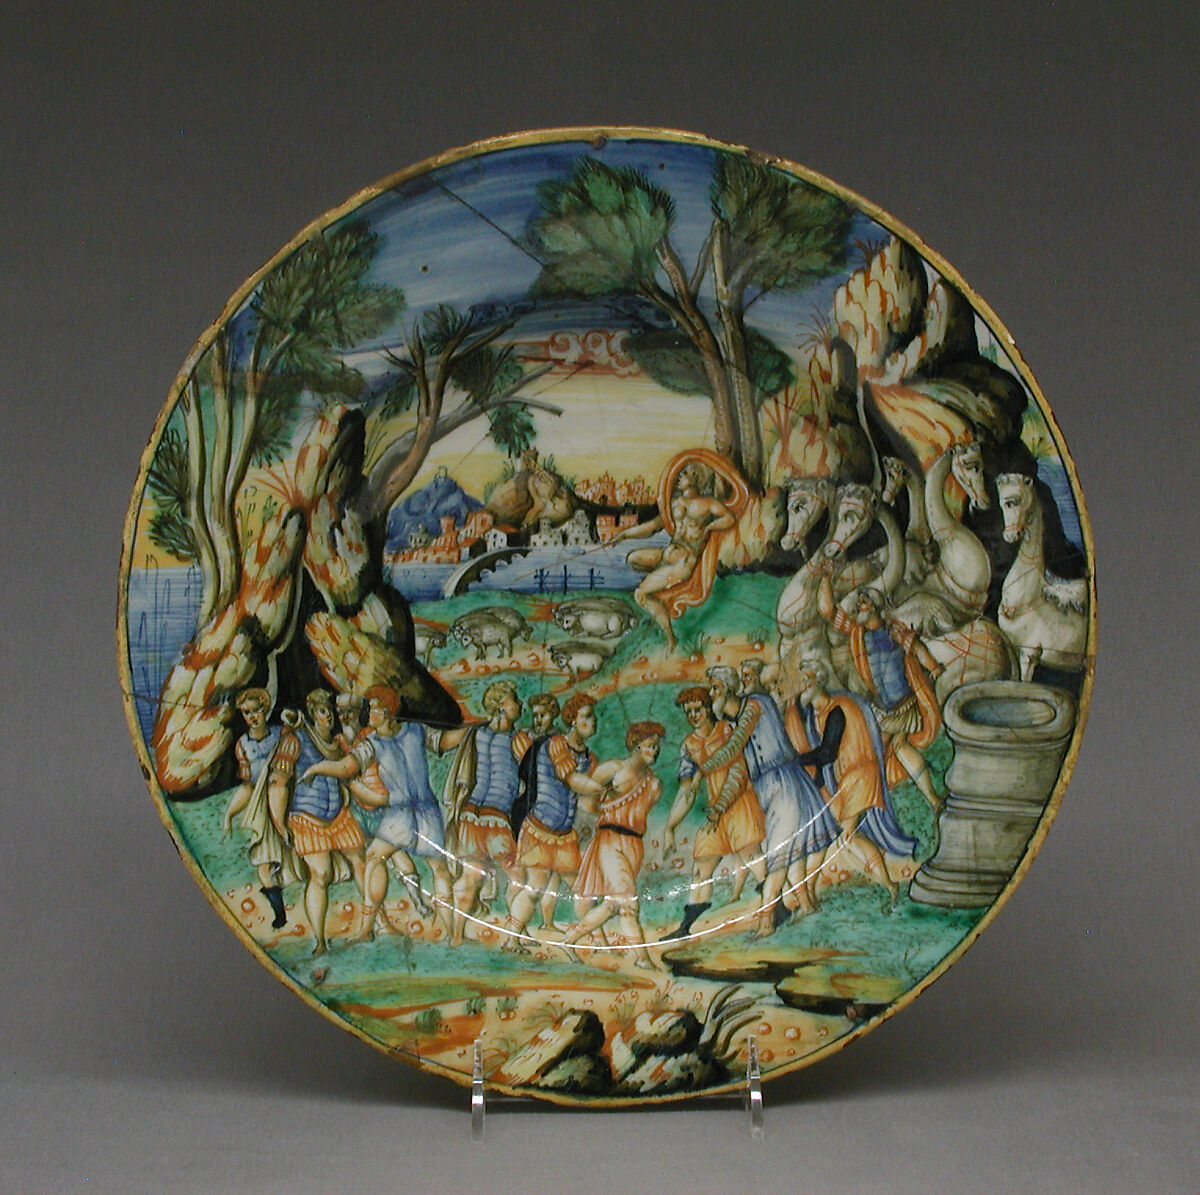 Plate with Joseph sold by his brothers, Workshop of Andrea da Negroponte, Maiolica (tin-glazed earthenware), Italian, Castel Durante 